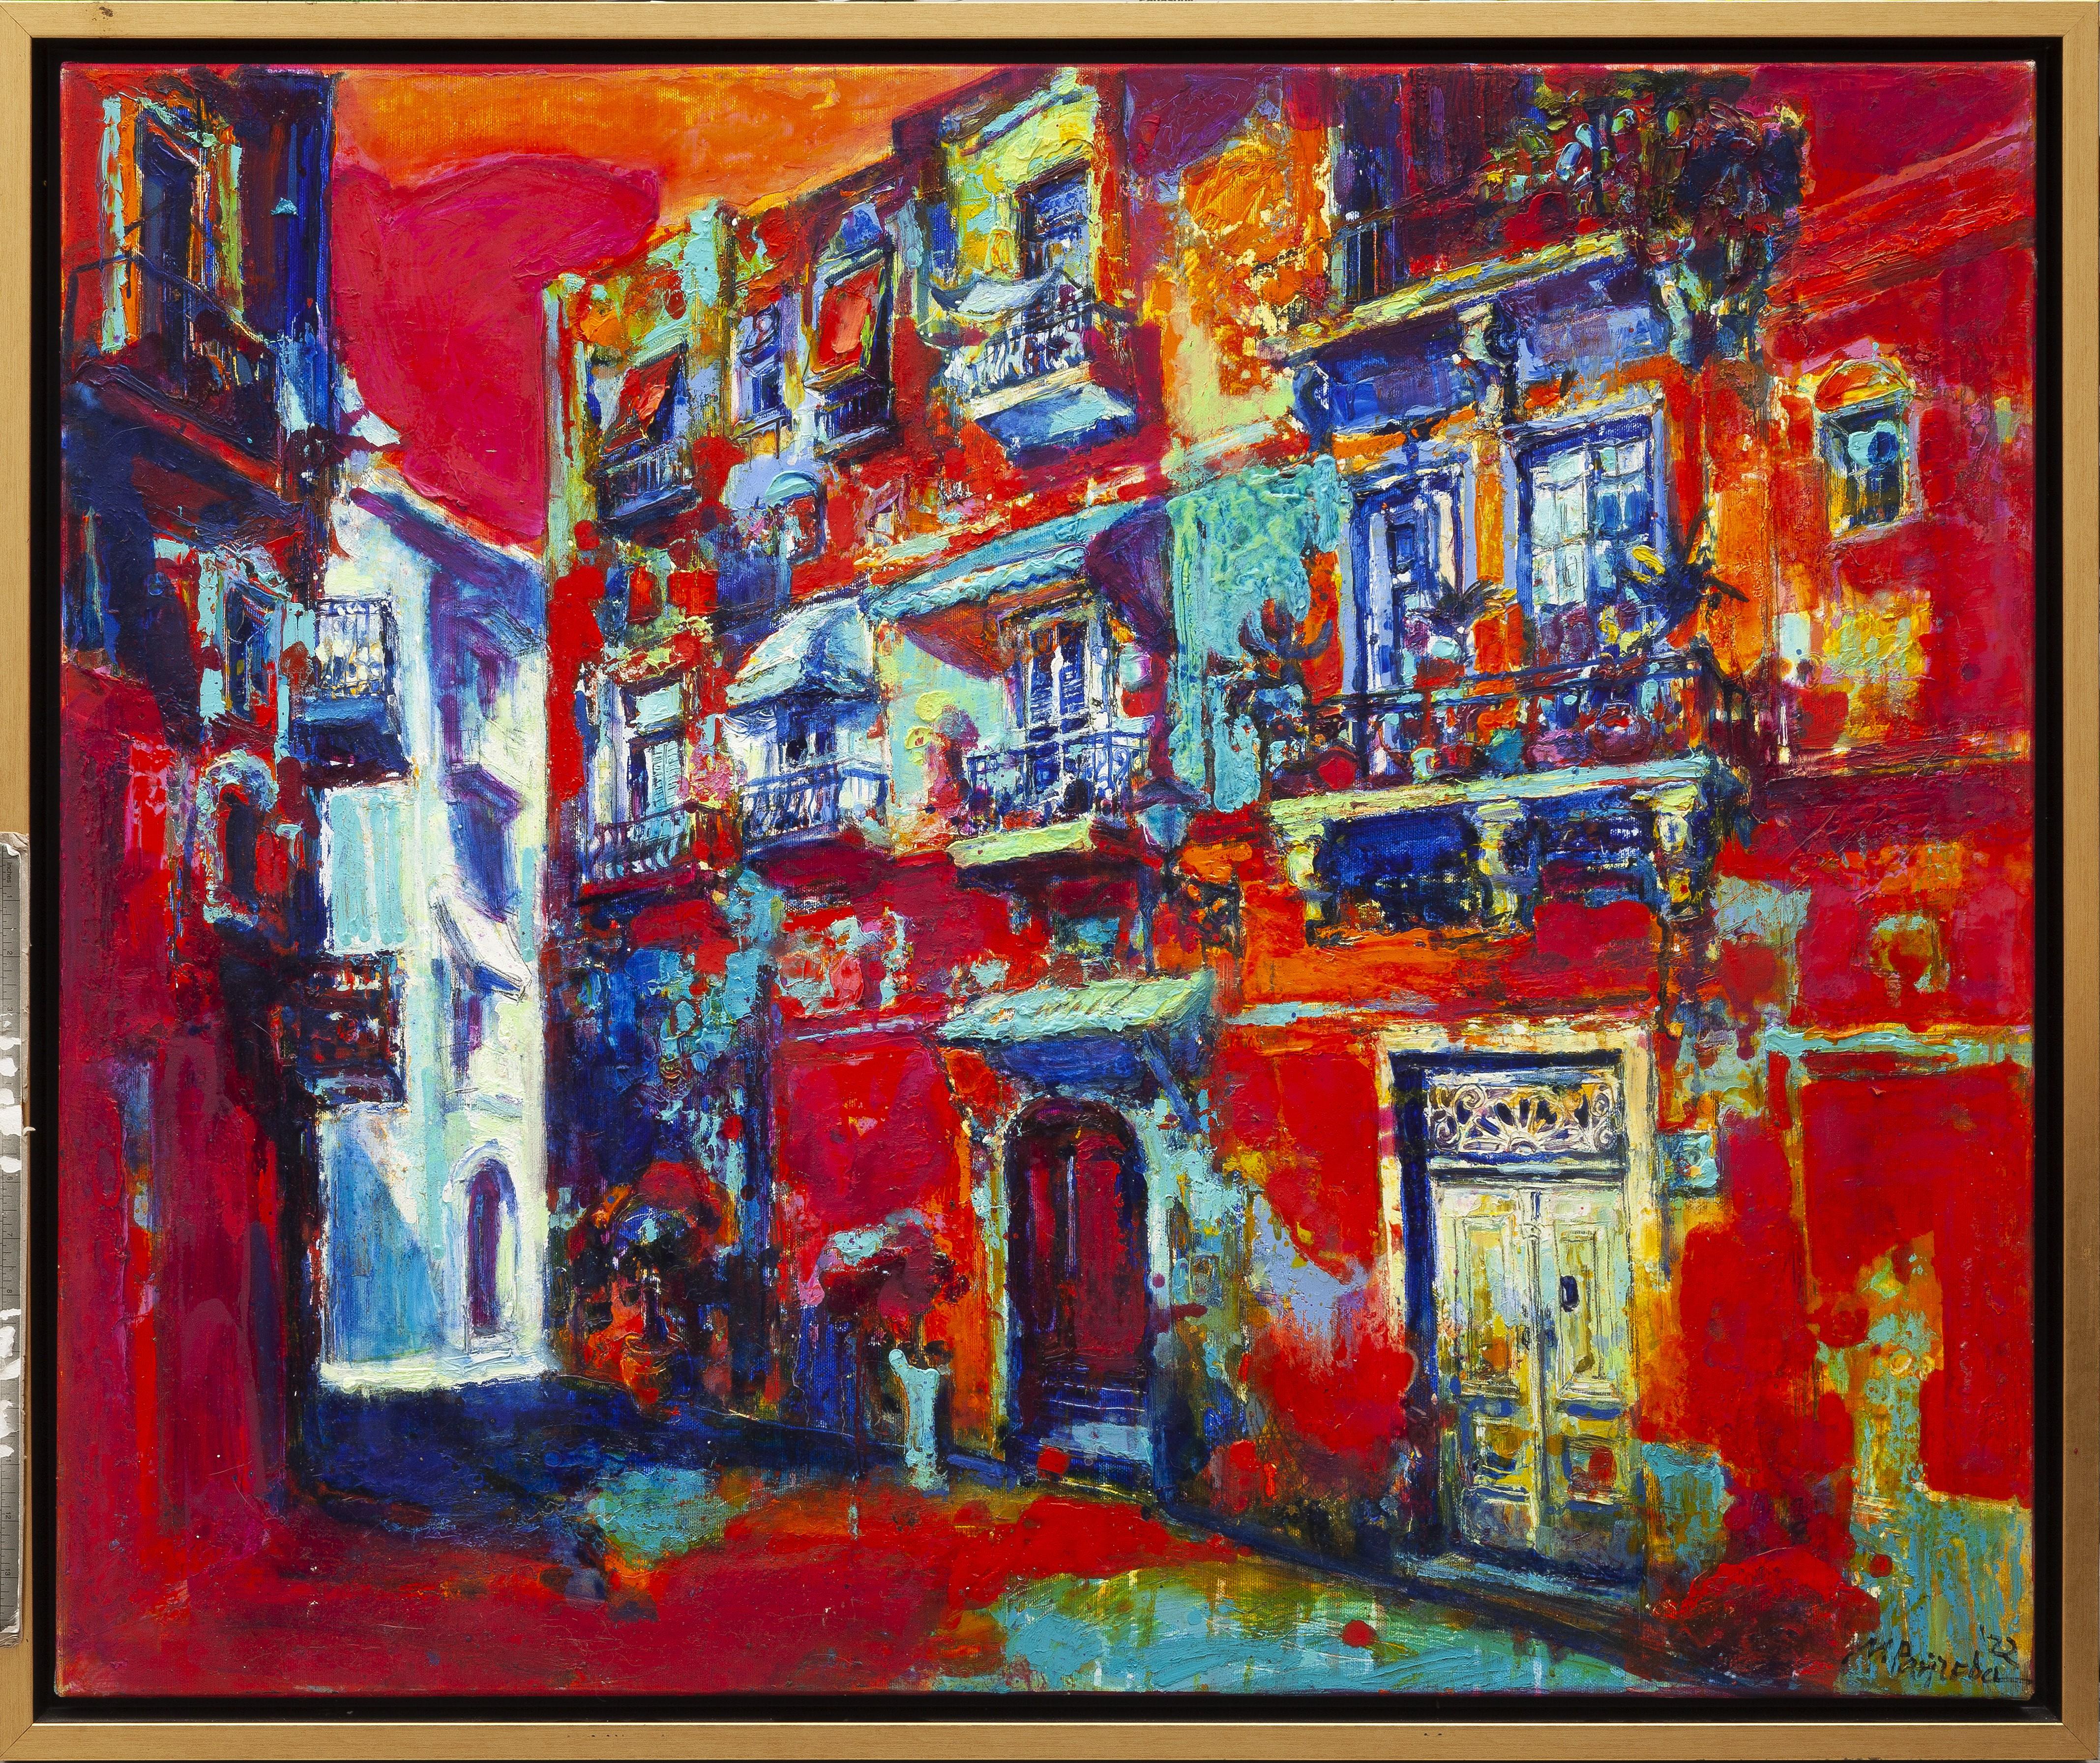 "Inviting the night" is a painting by Maestro impressionist Maria Raycheva.

The painting is unframed.

About the artwork:

TECHNIQUE:  oil painting
STYLE: Impressionist, Contemporary
Edition : Unique, signed
Weight: Approximately 3 kg.

Frame: